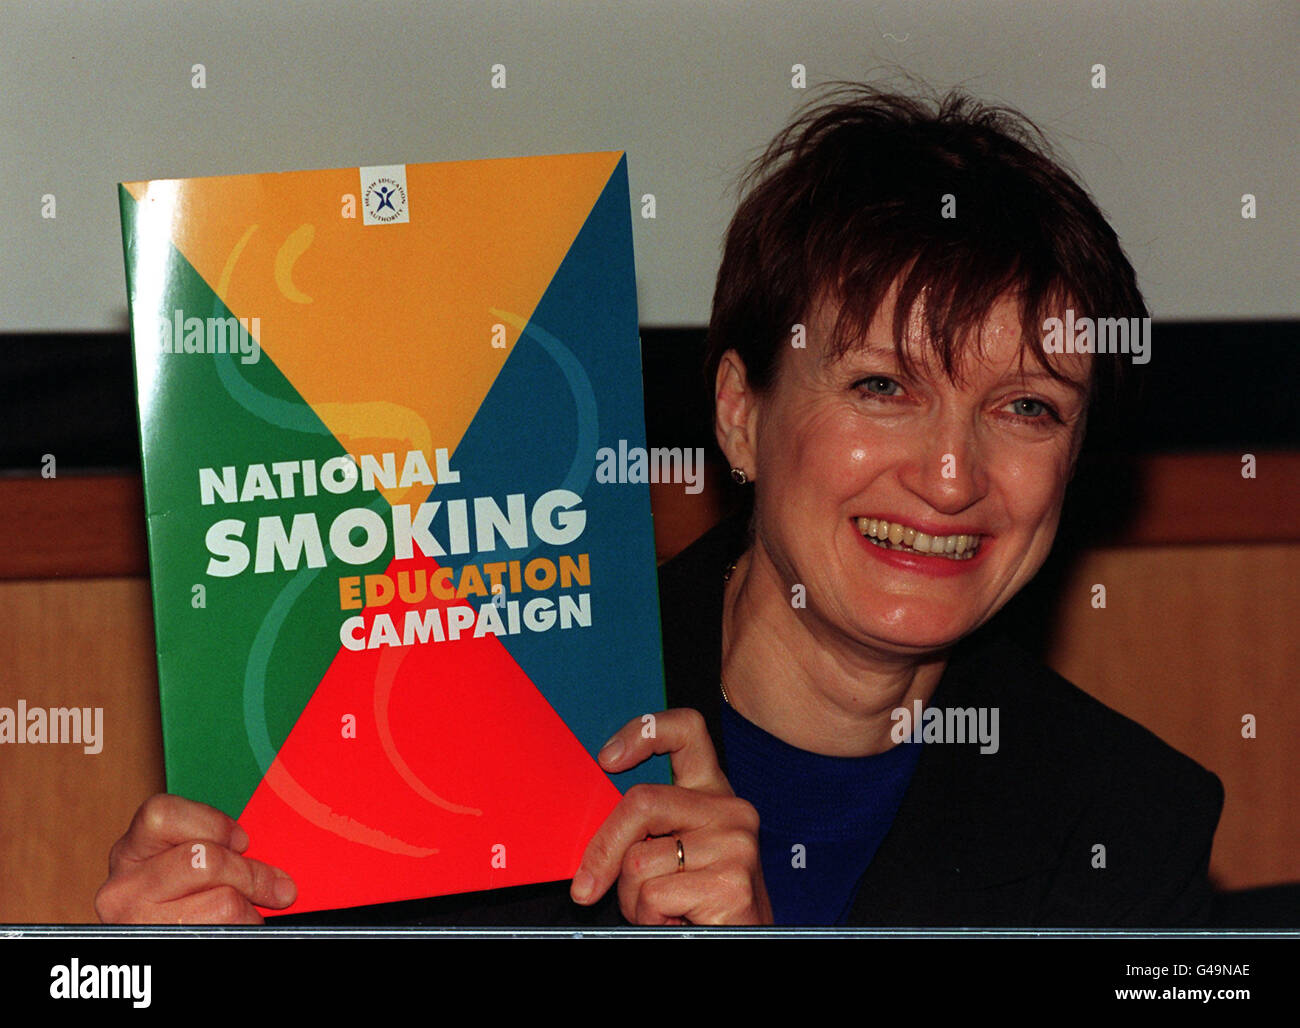 Minister for Public Health, Tessa Jowell, holds up a Health Authority information pamphlet on smoking at the launch of their latest and most hard-hitting anti-smoking campaign at the Royal Brompton Hospital in London today (Tuesday). The 2.5 million TV and radio advertising campaign, which features real people who sufffering from smoking-related diseases, will run from Boxing Day to the end of March in an attempt to stop the increase in the number of young smokers. Watch for PA story. Photo by John Stillwell/PA Stock Photo